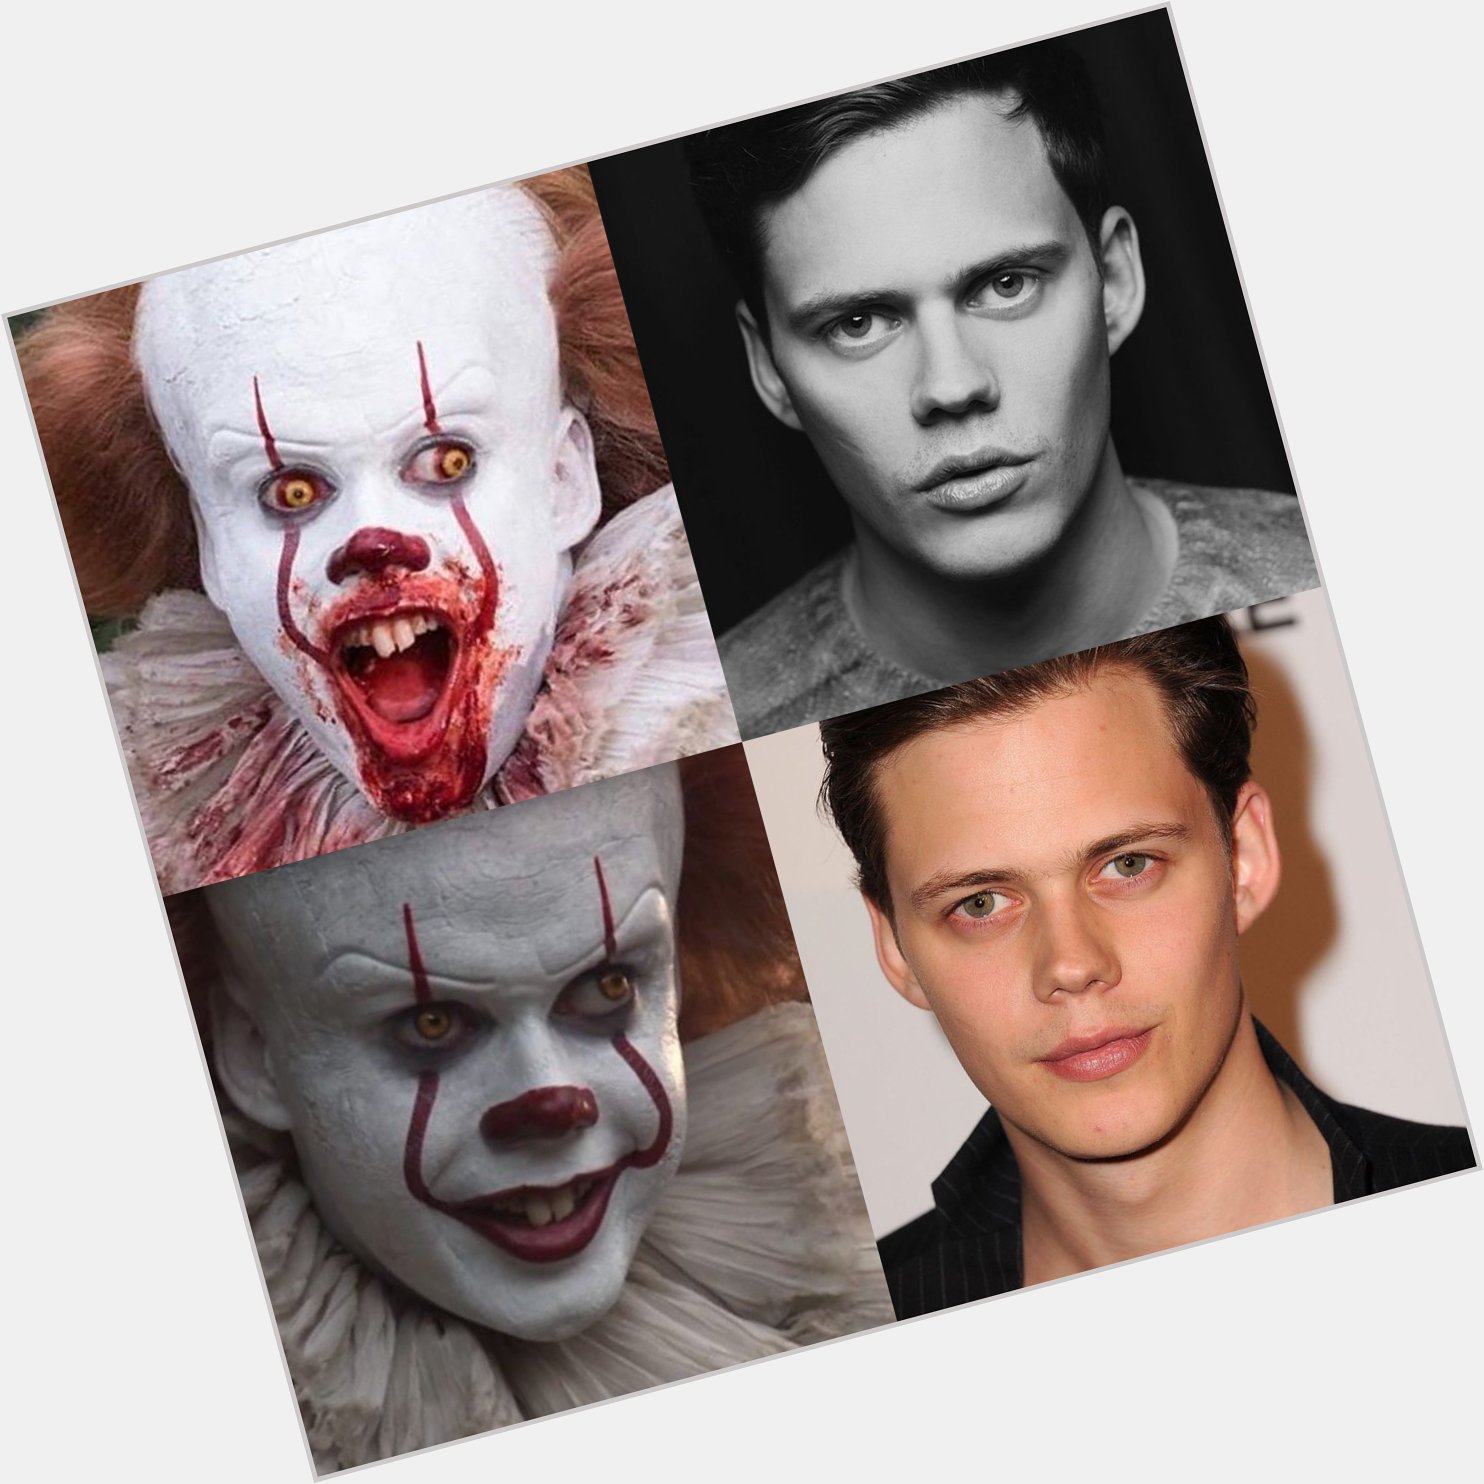 Happy 30th birthday to Bill Skarsgard! Thank you for scaring the crap out of us as Pennywise the Clown! 